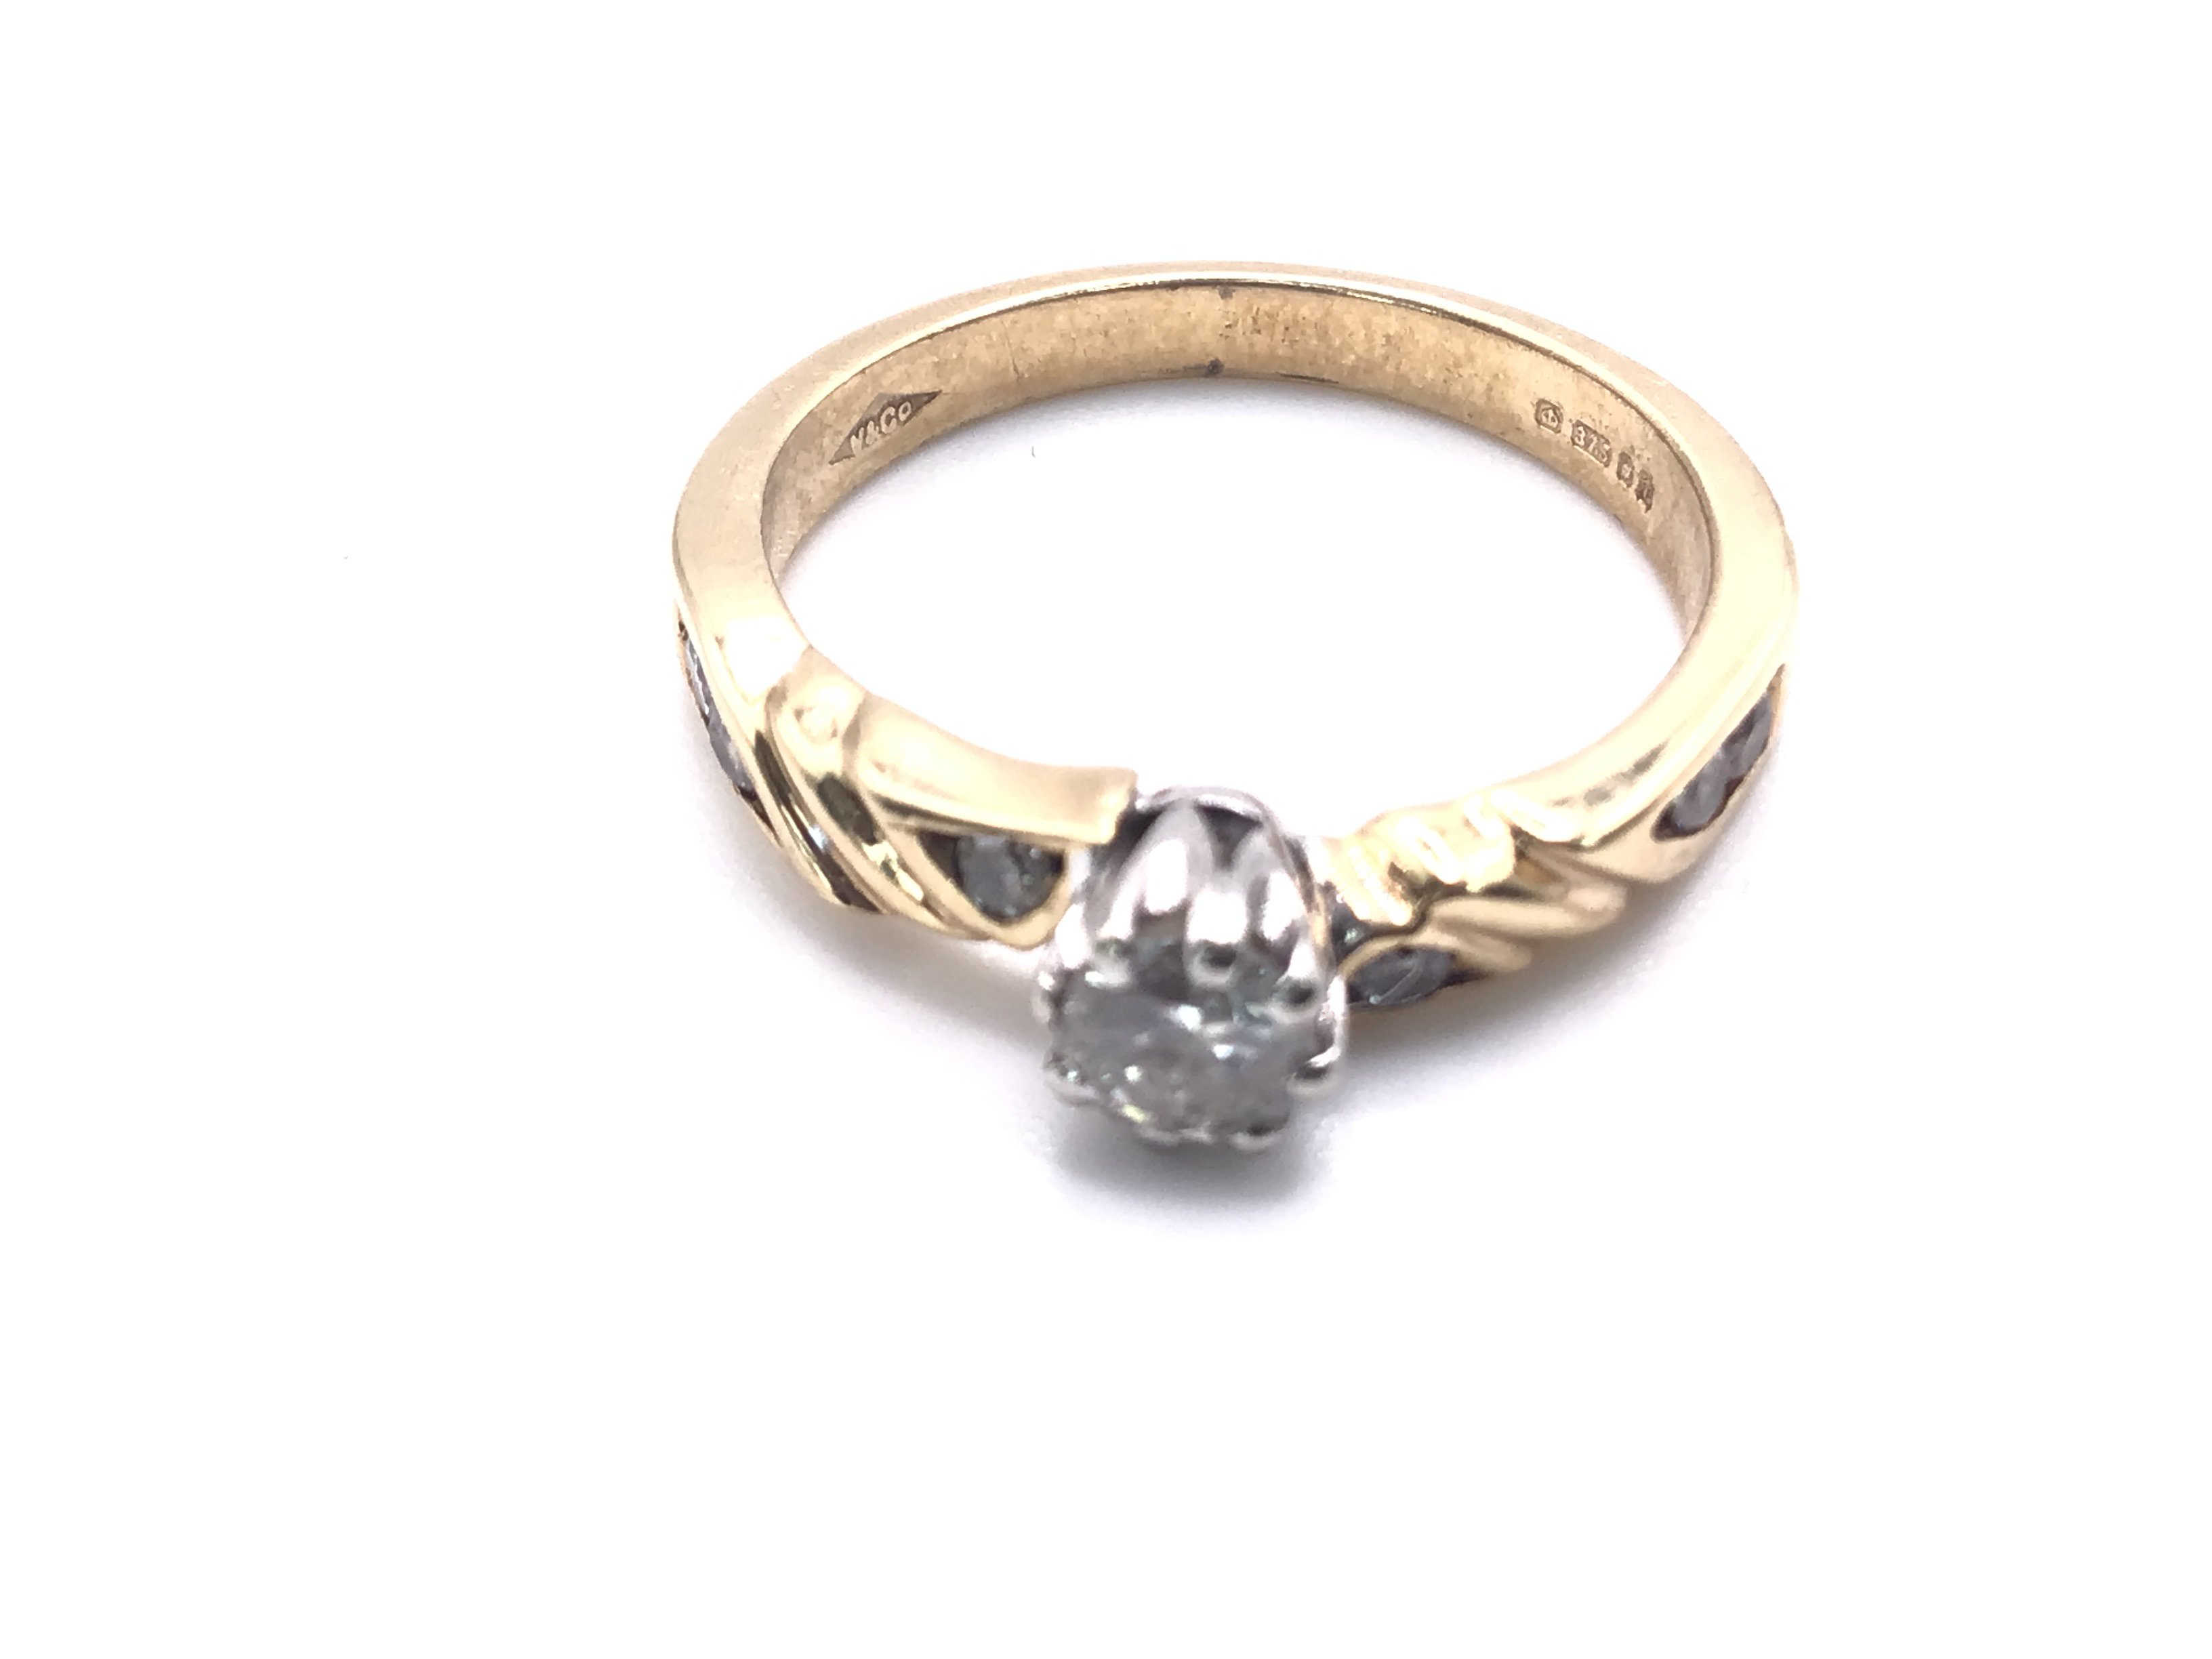 A 9 Ct Gold Dimond Solitaire with Diamonds on Band